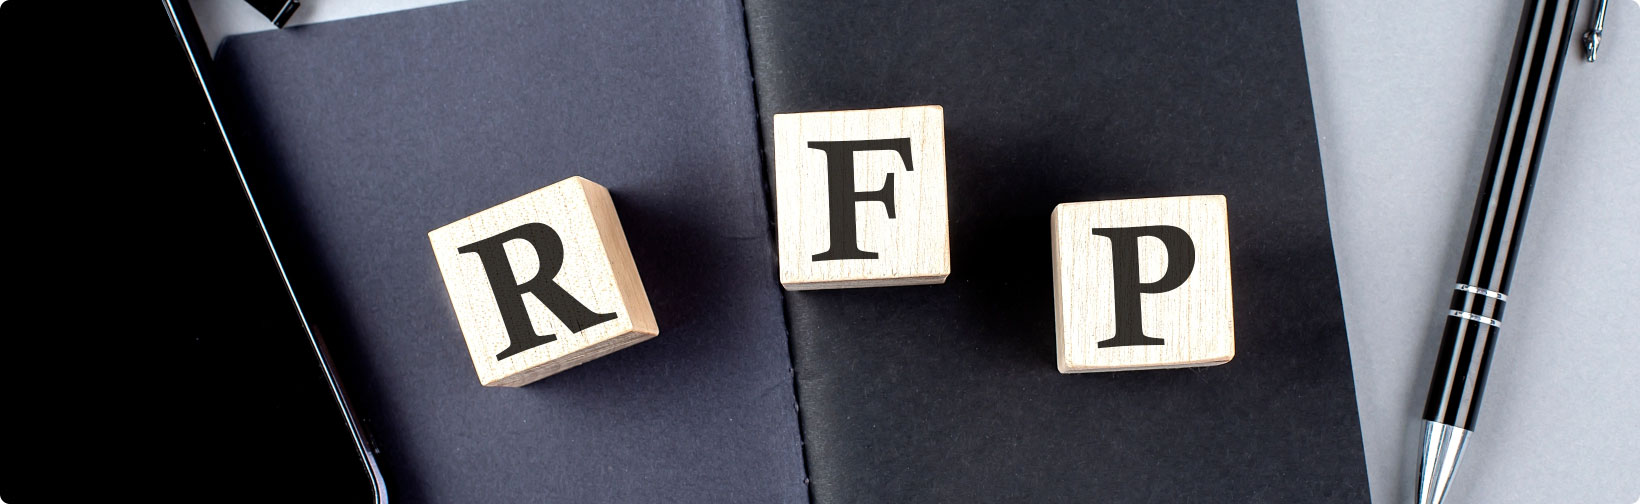 THE ART OF CRAFTING A COMPELLING RFP: KEY ELEMENTS FOR SUCCESS